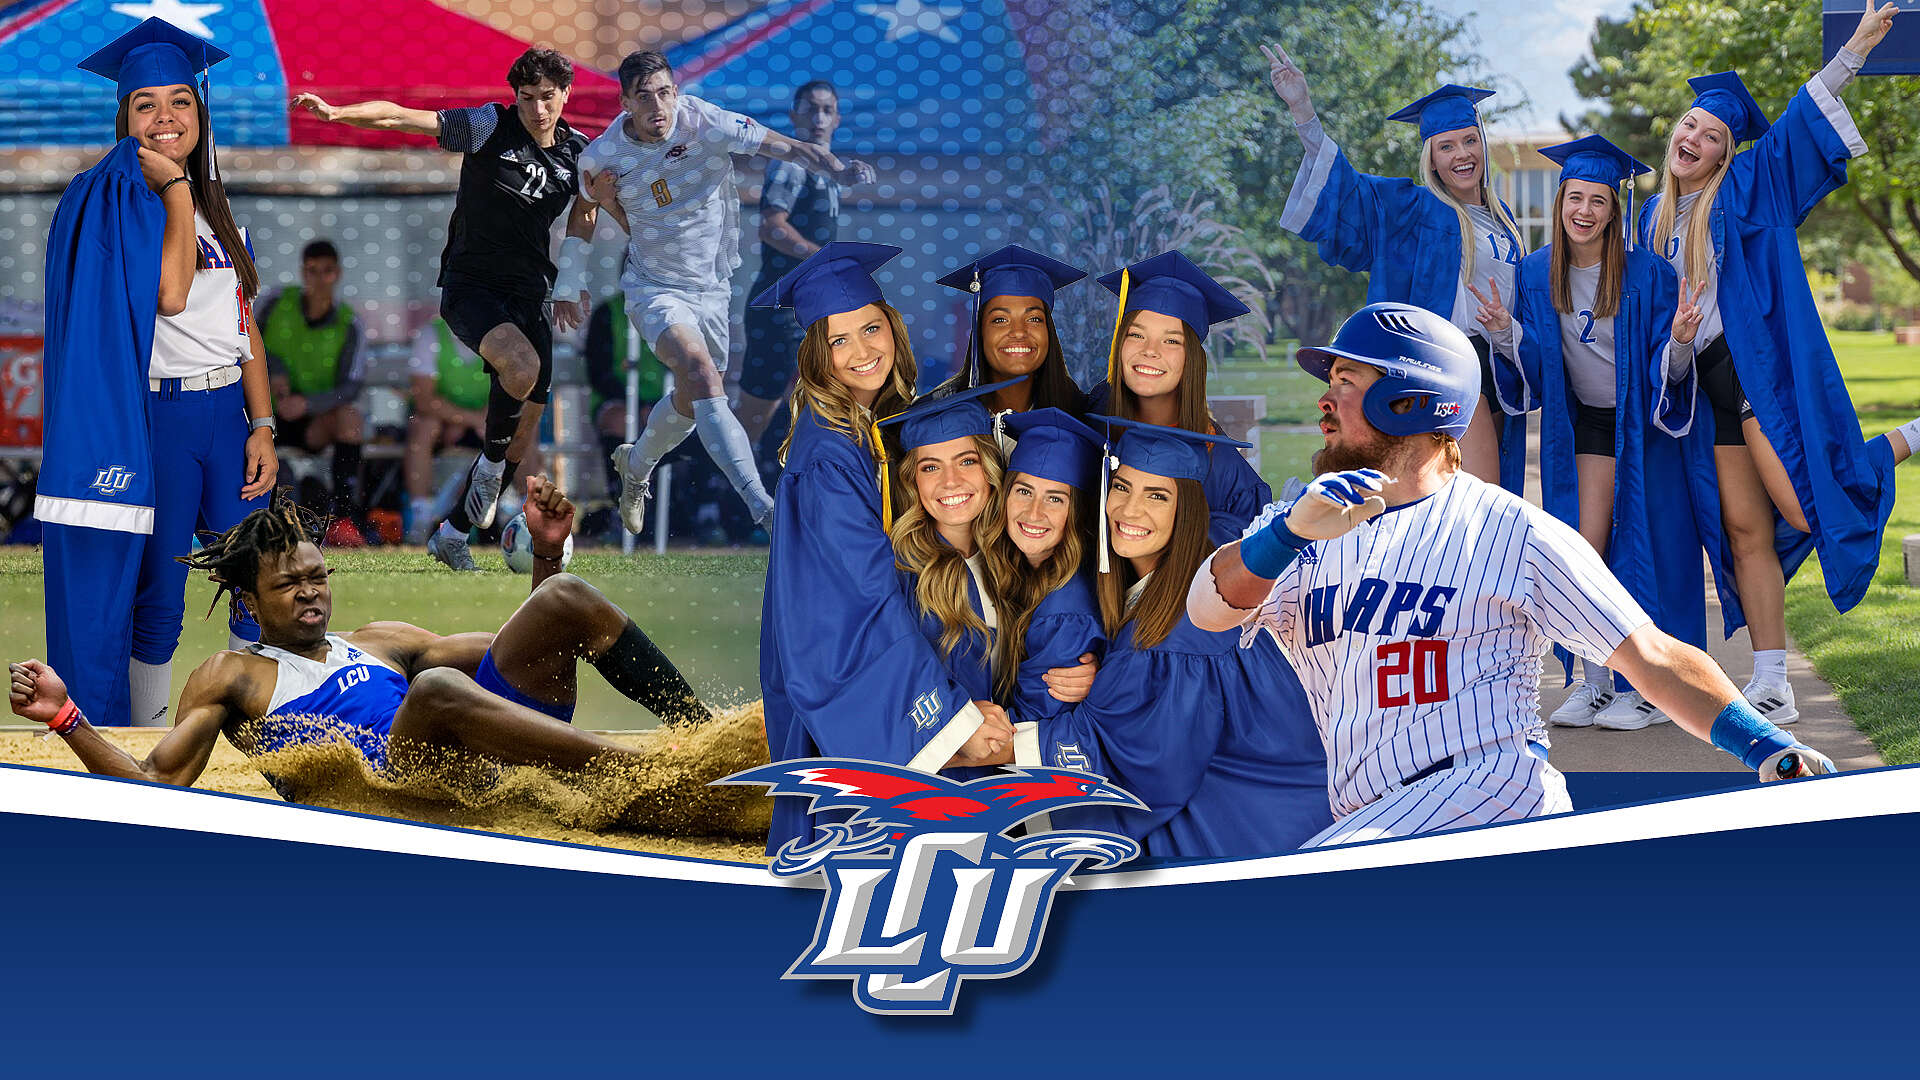 A collage of various LCU student athletes including participants in track, volleyball, basketball, baseball, softball, and soccer